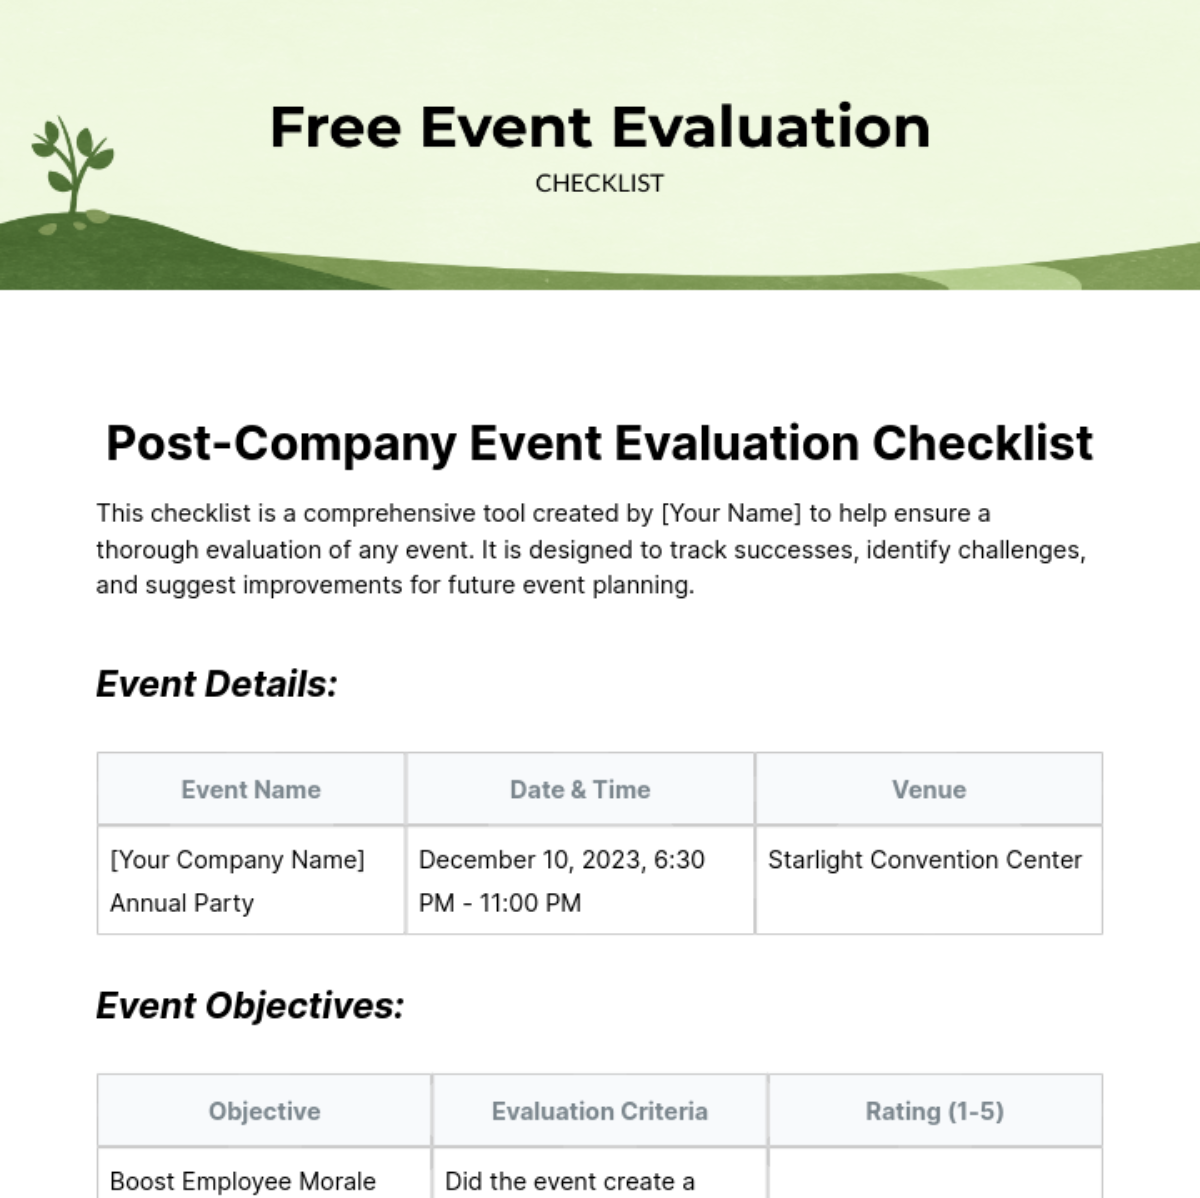 Free Event Evaluation Checklist Template